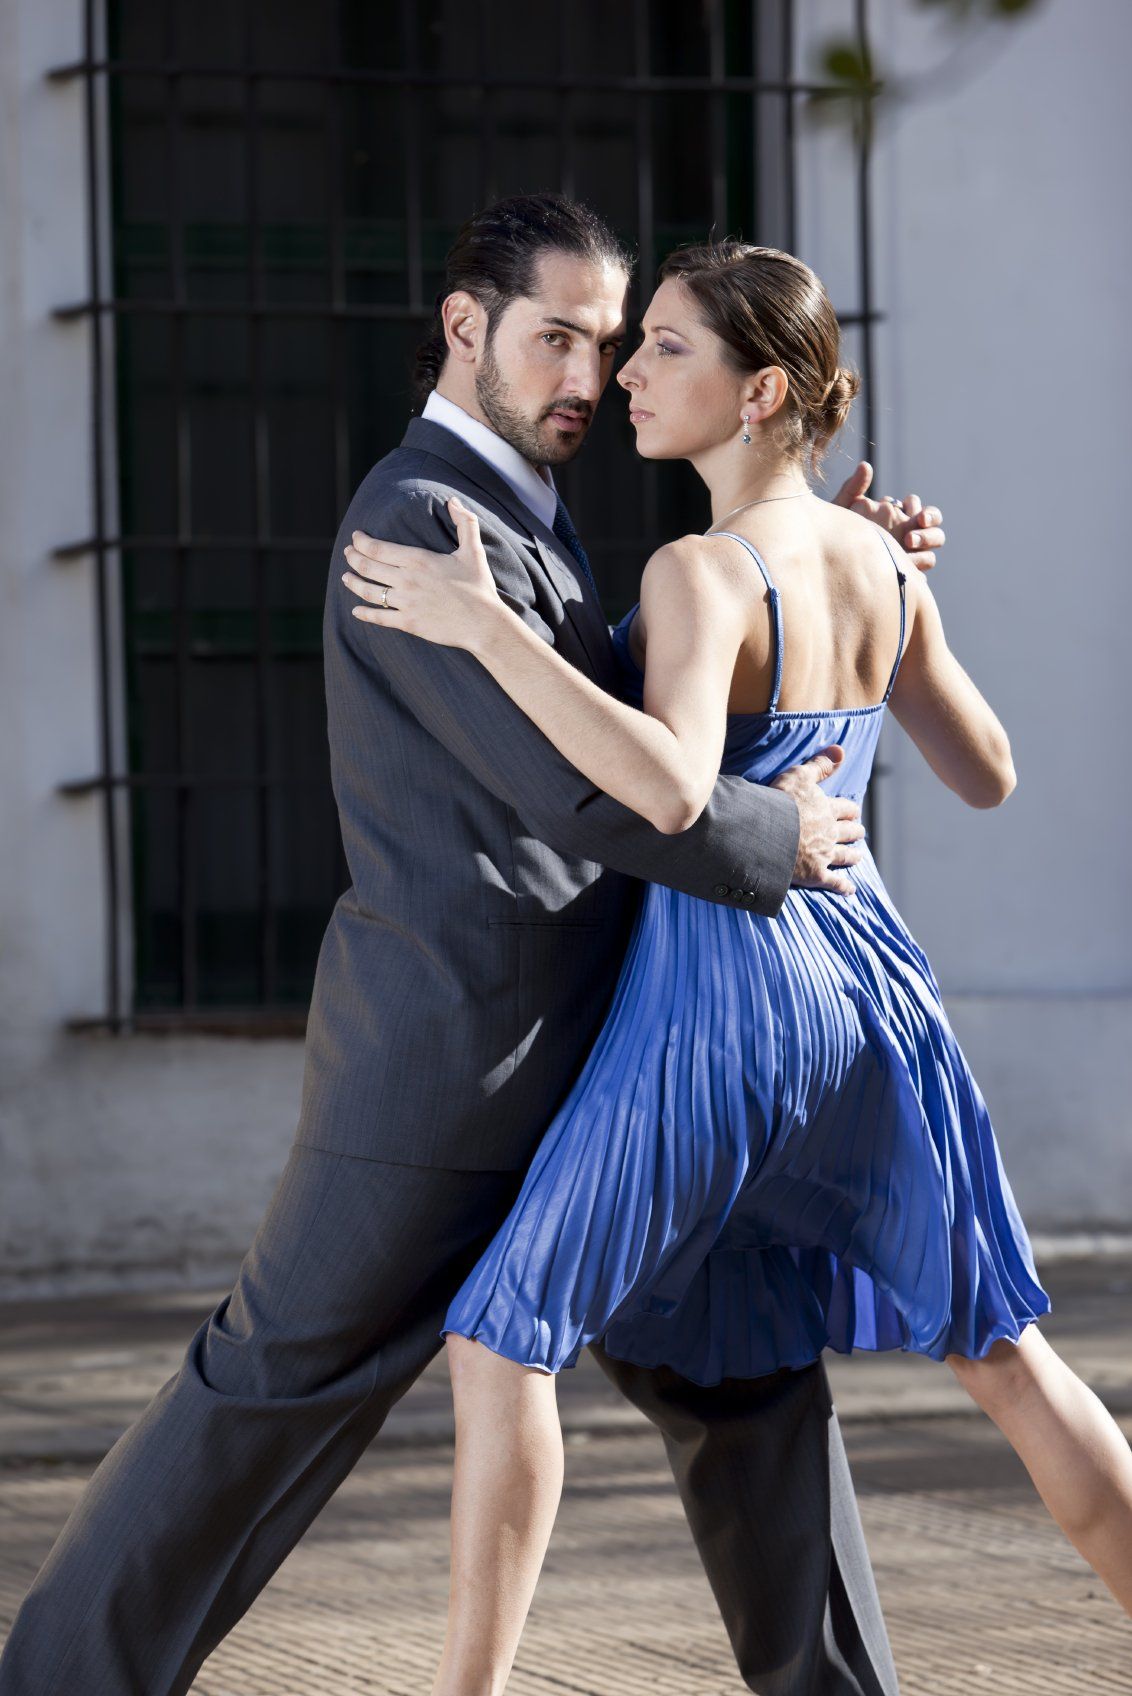 Young man in grey suit, dancing tango with young lady in blue dress